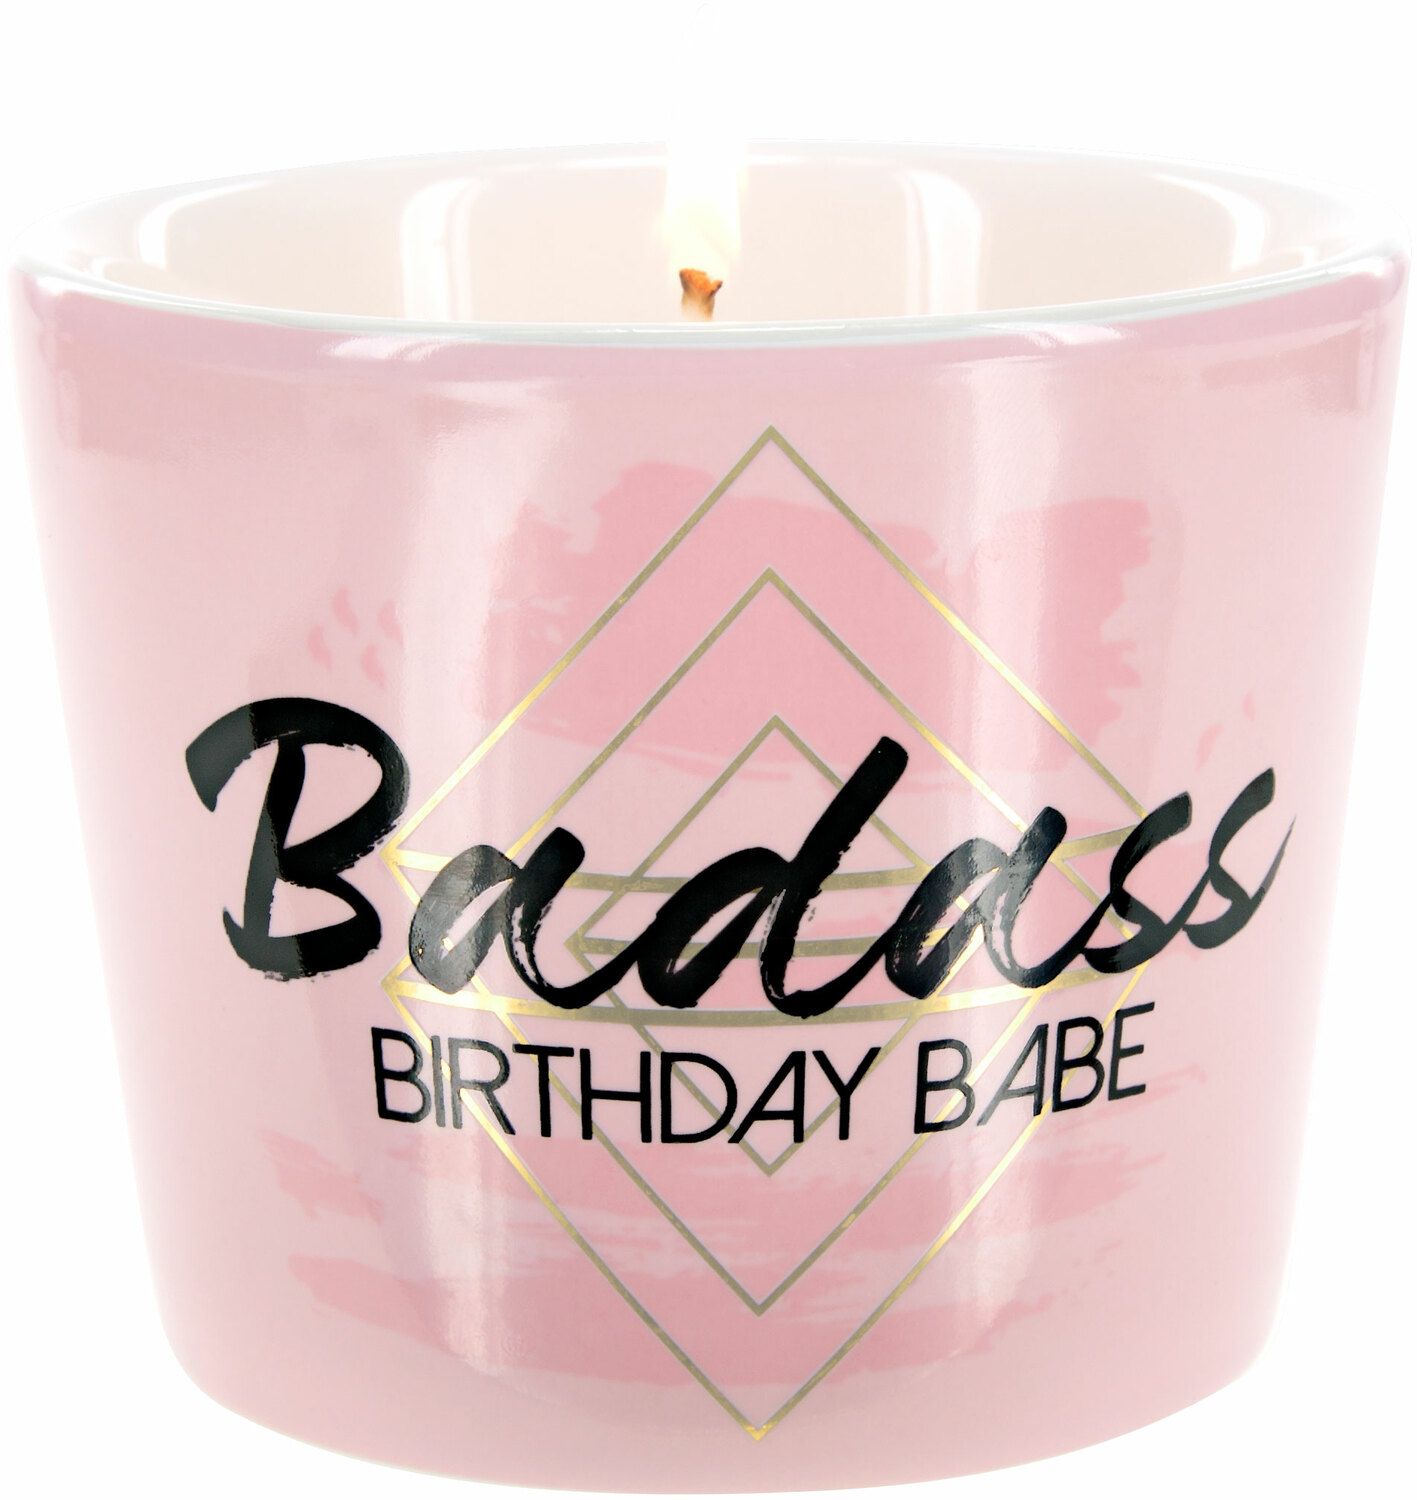 Badass by Salty Celebration - Badass - 8 oz Soy Wax Candle
Scent: Tranquility